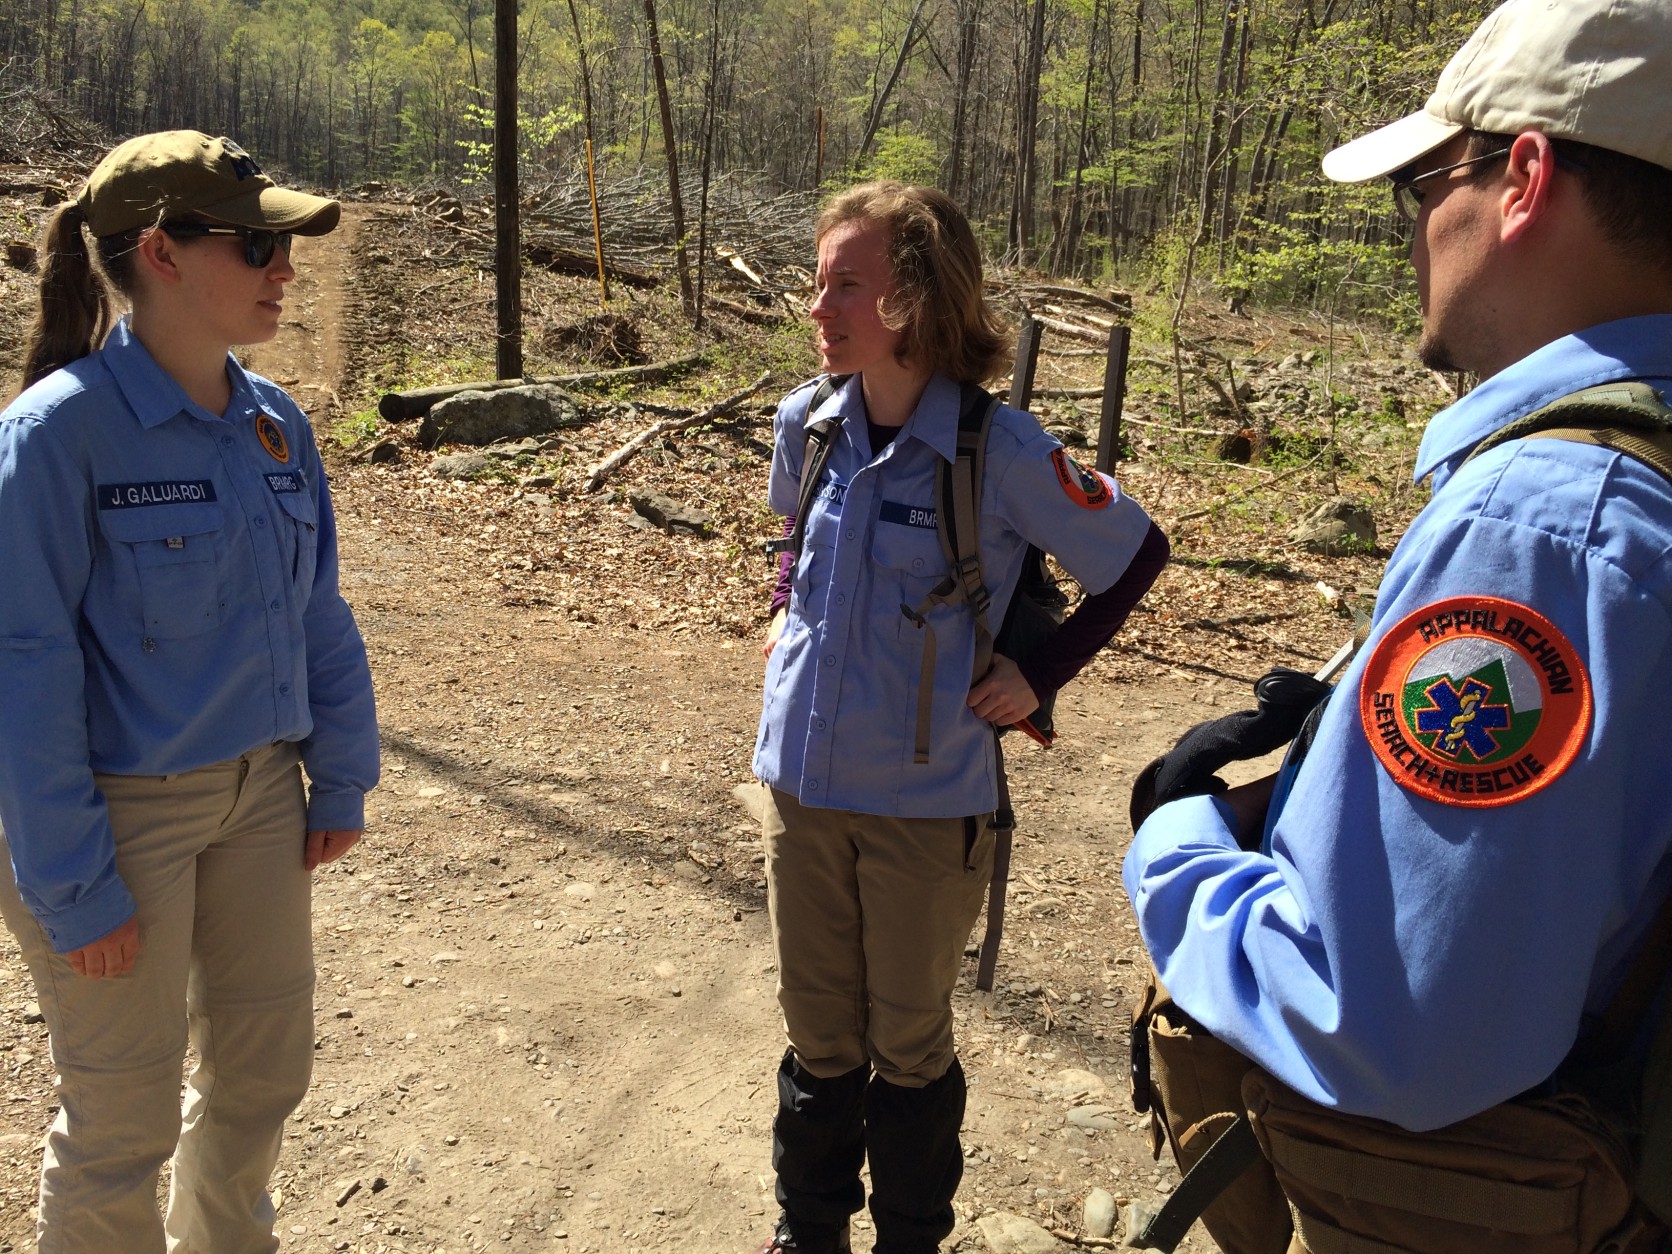 Members of the Appalachian Search & Rescue Team help Virginia State Police looking for 31-year-old Nicole Mittendorff Monday in Shenandoah National Park. (Courtesy Virginia State Police)